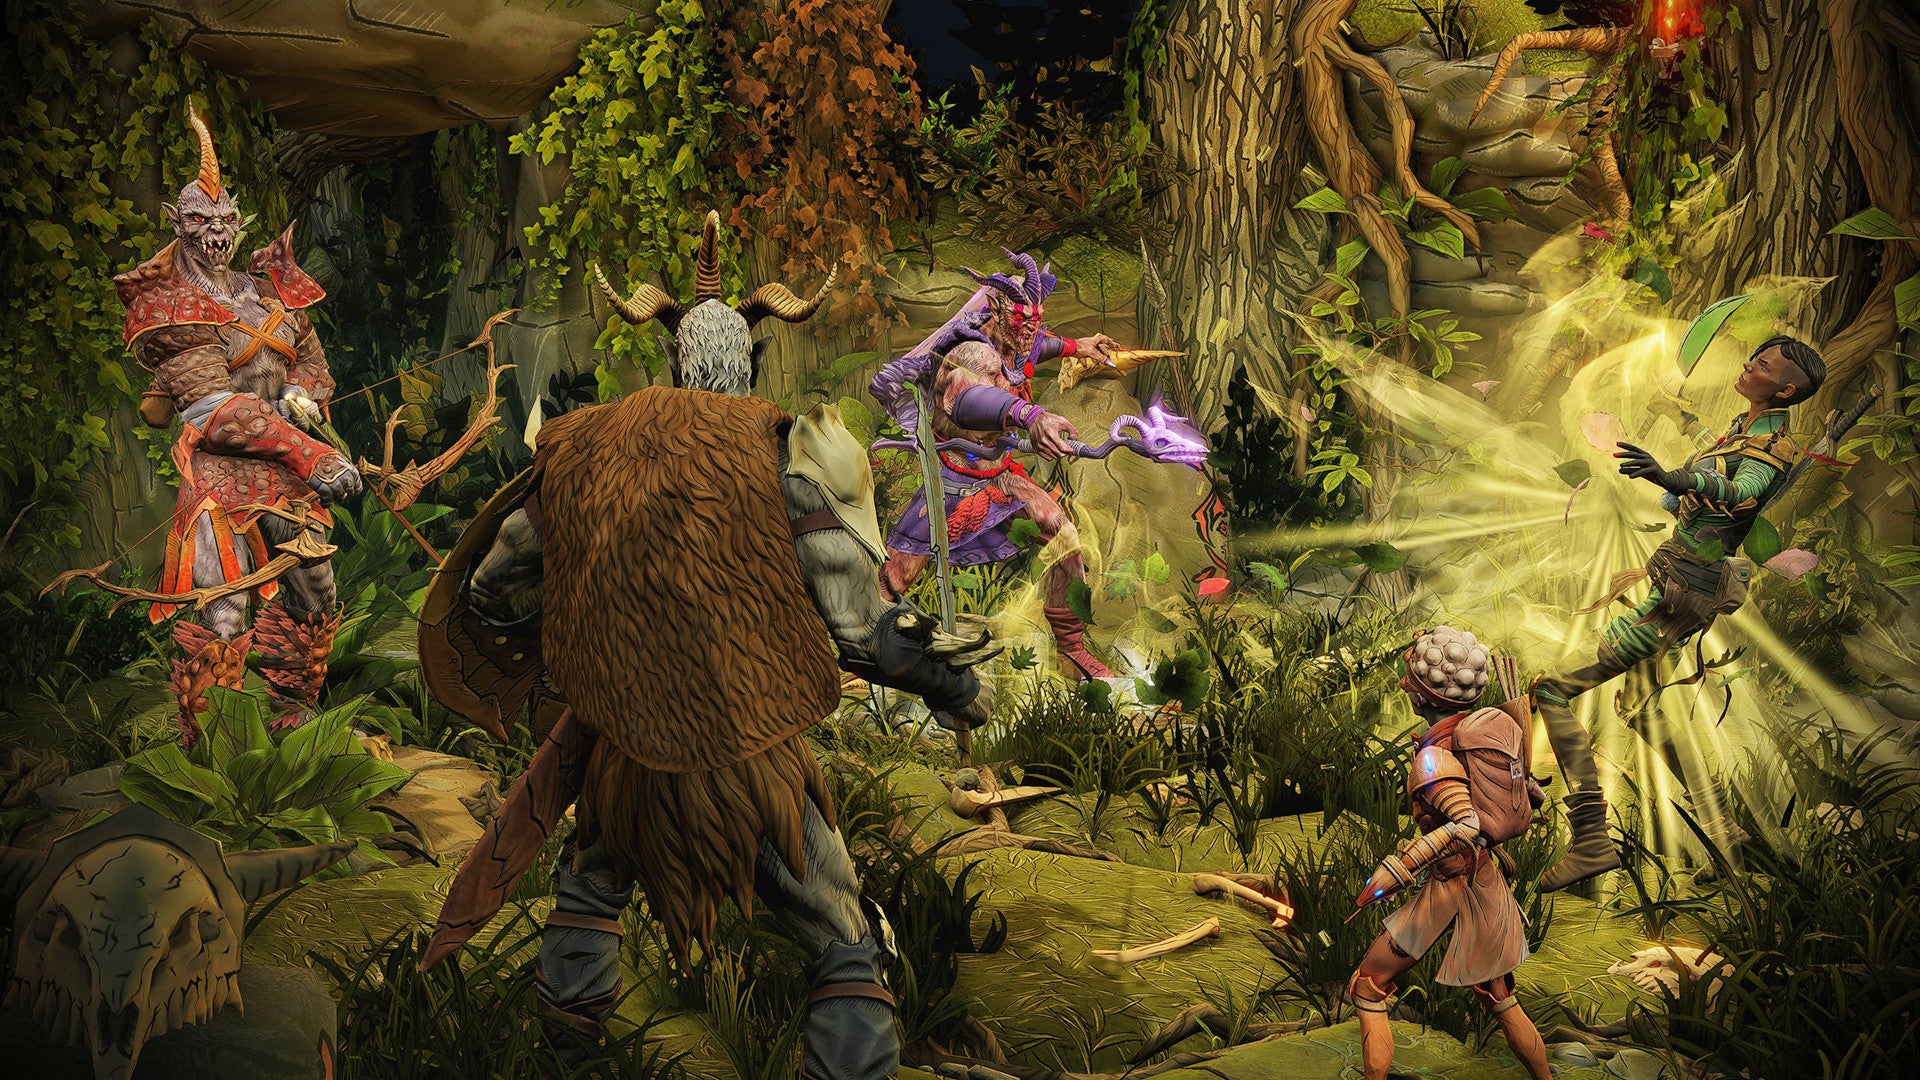 A mage attacks a group of players in a forest scene in Gloomhaven